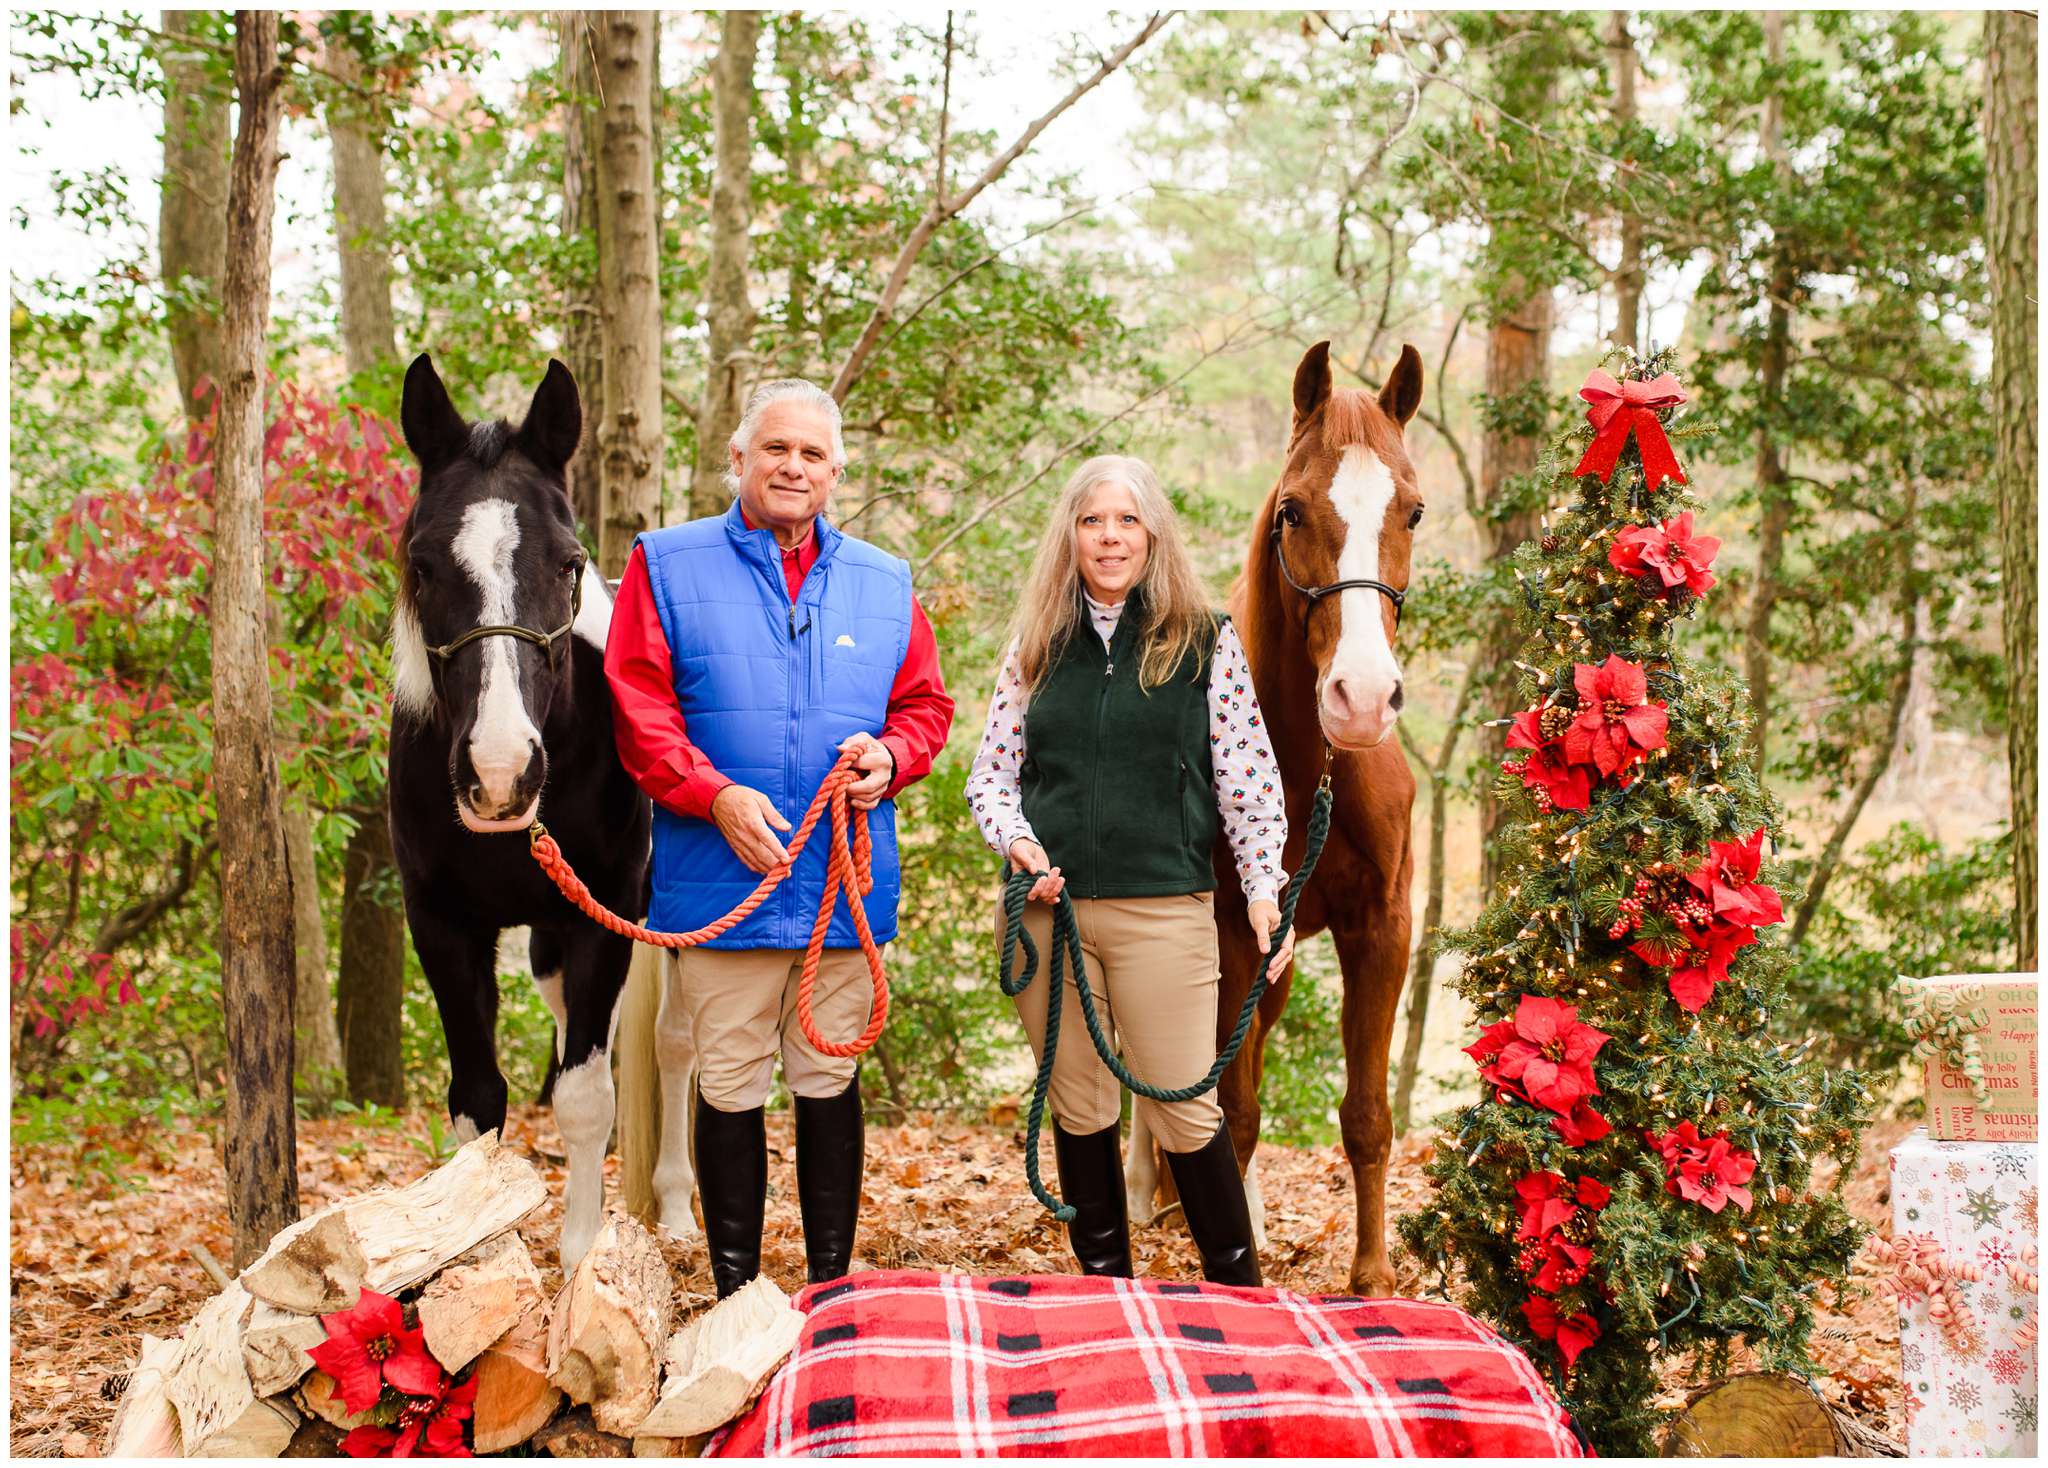  These two horses were just saints for these pictures! They posed perfectly, and just were so good for these. I loved that the Thacker's included them in their photos!&nbsp; 